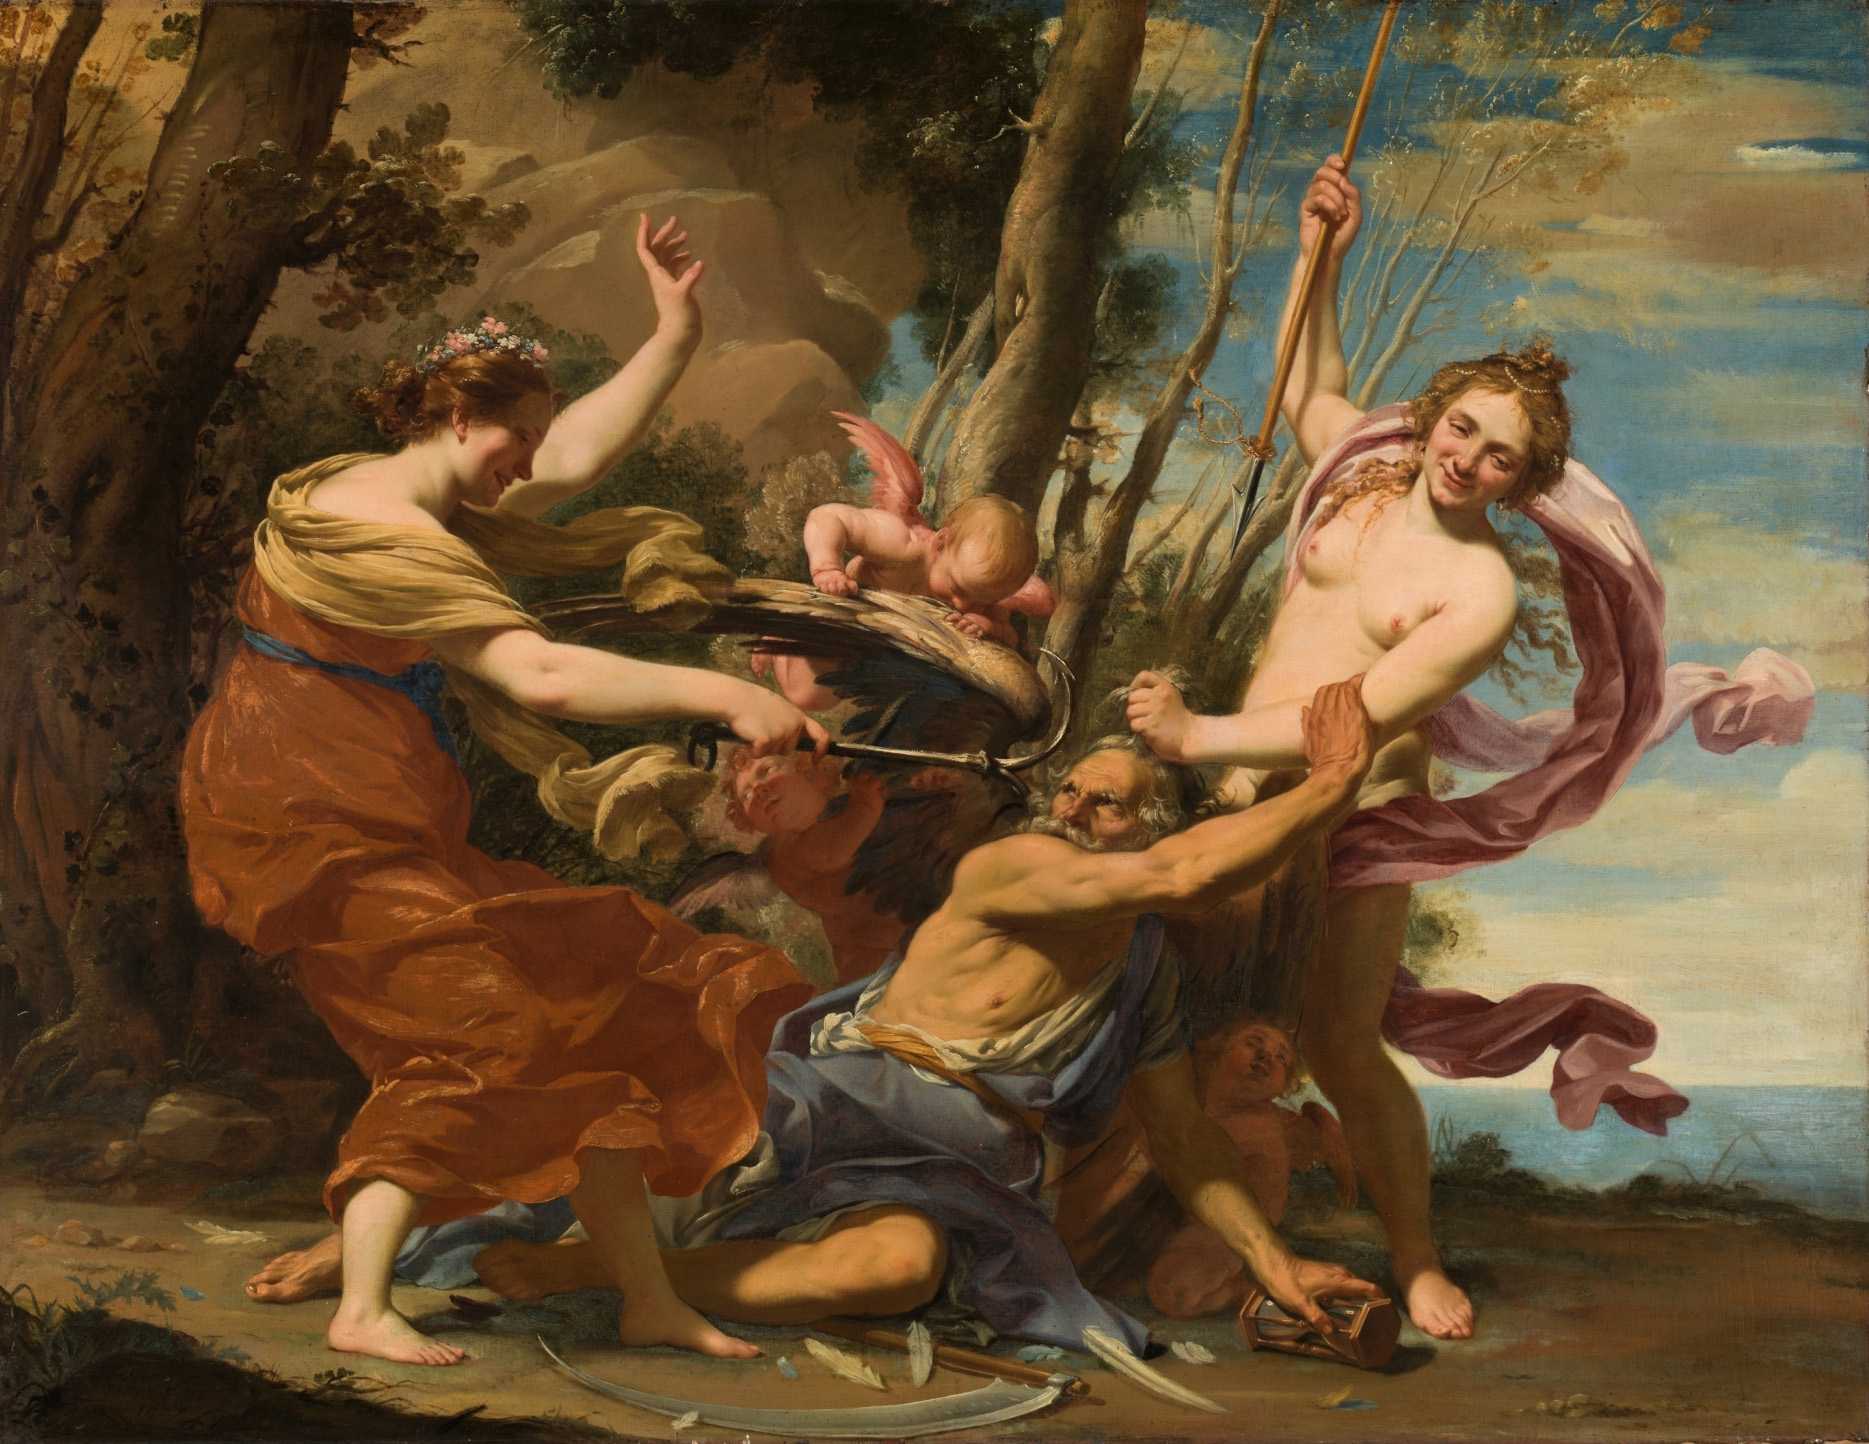 Find out more about Simon Vouet - Father Time Overcome by Love, Hope and Beauty